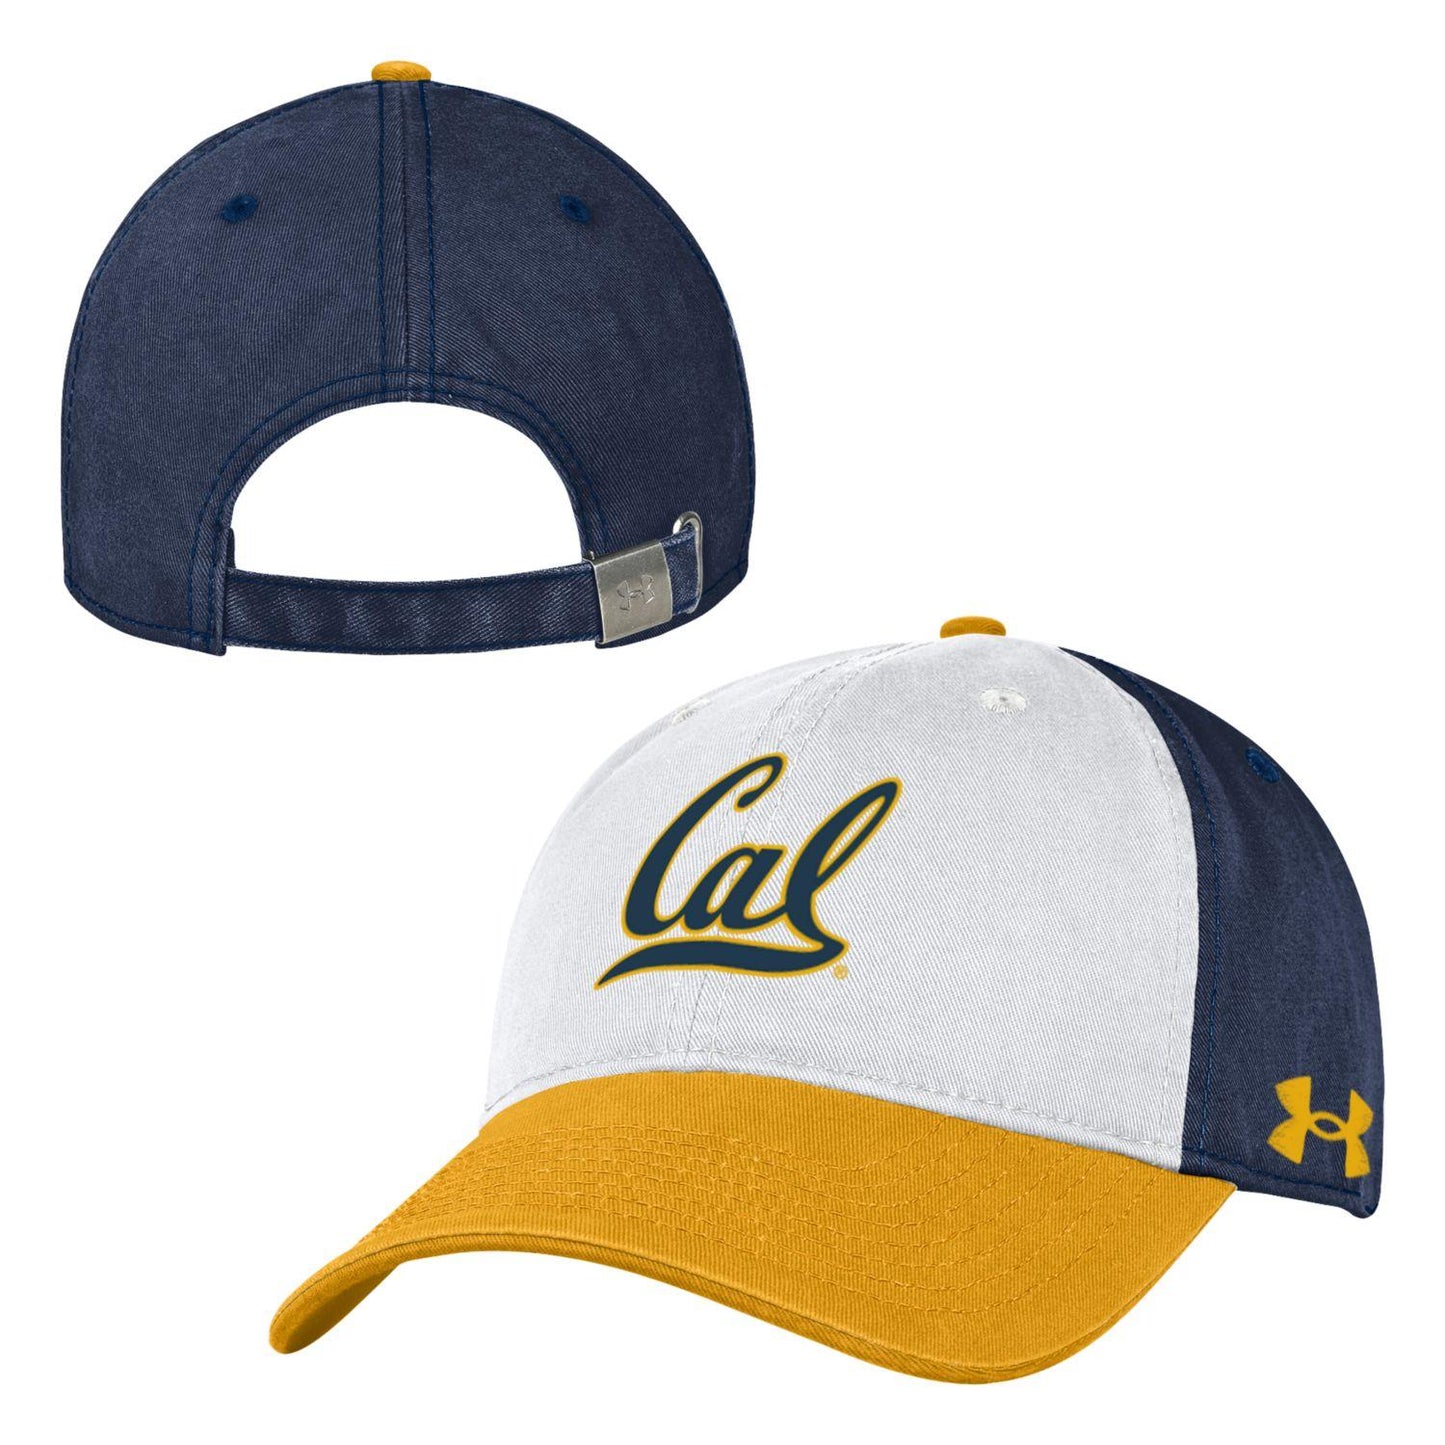 U.C. Berkeley Cal embroidered Under Armour coolor block hat-Navy-Shop College Wear